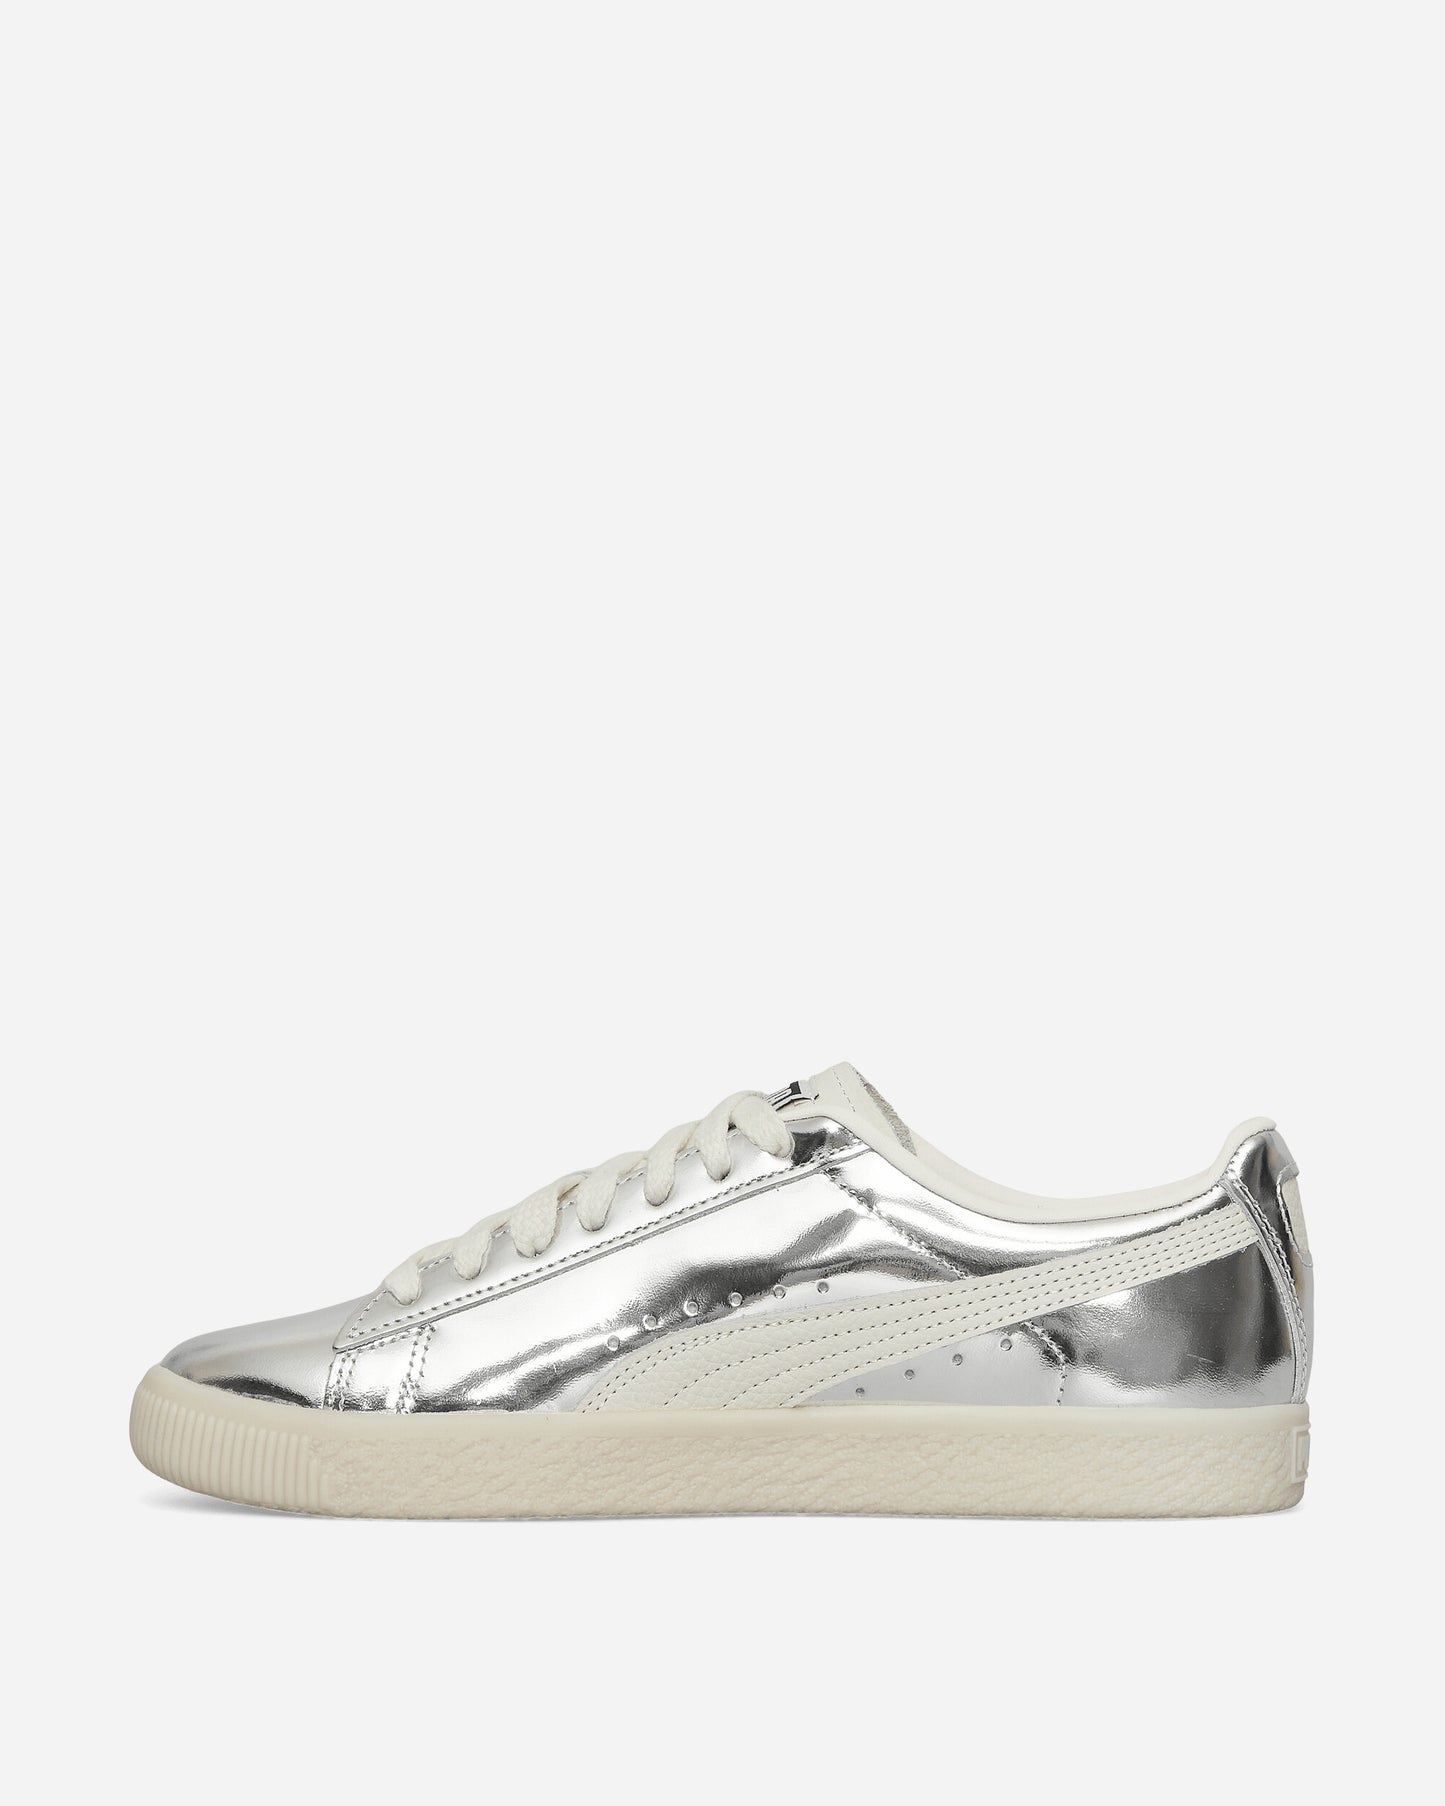 Puma Clyde 3024 Puma Silver/Warm White Sneakers Low 396488-01